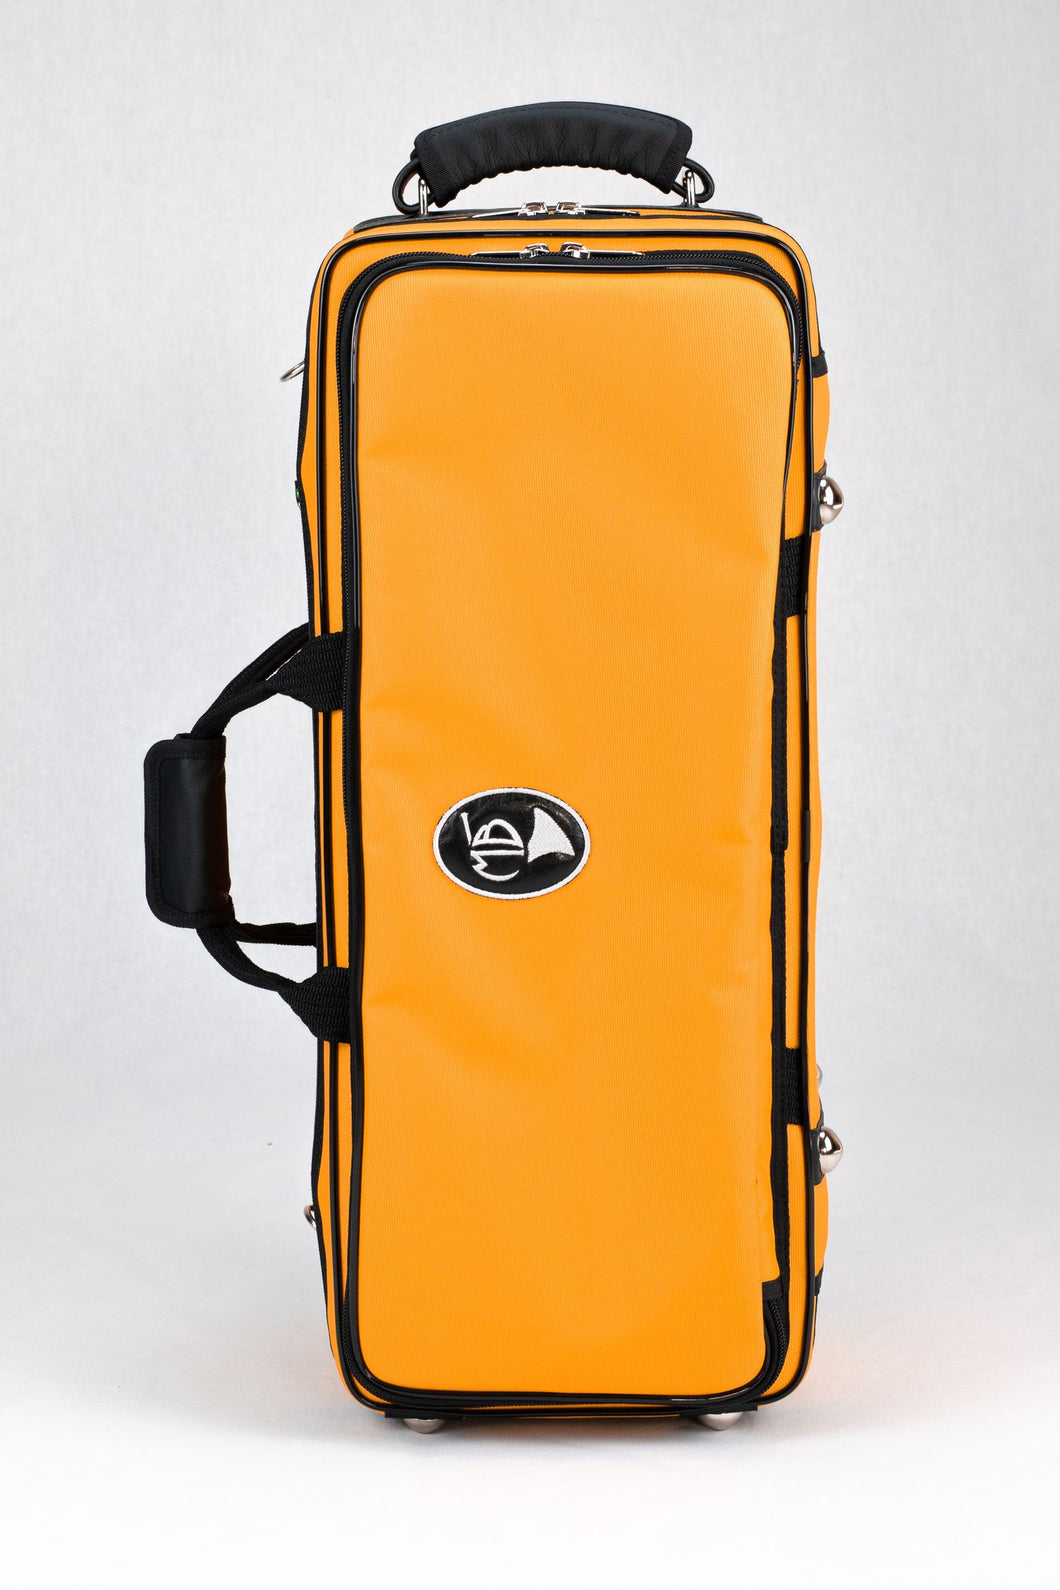 MB case for 2 Rotary trumpets Case